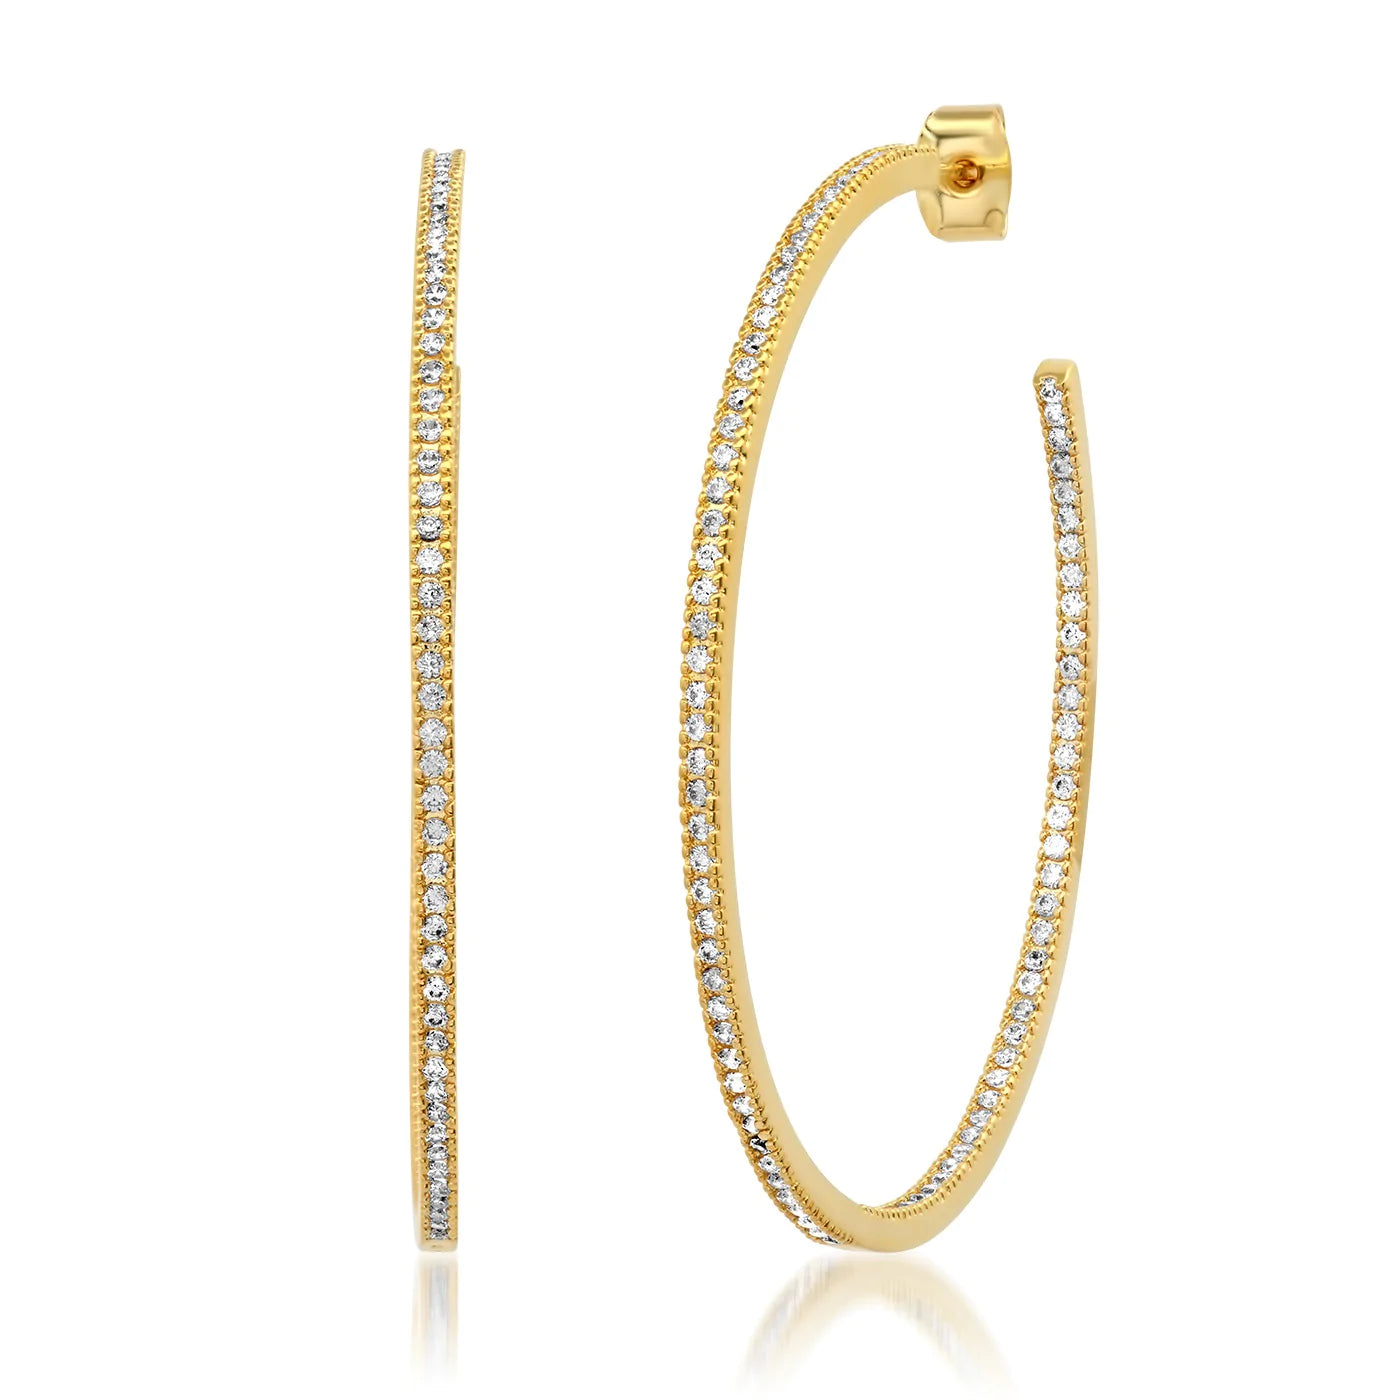 Large Pave CZ Hoops